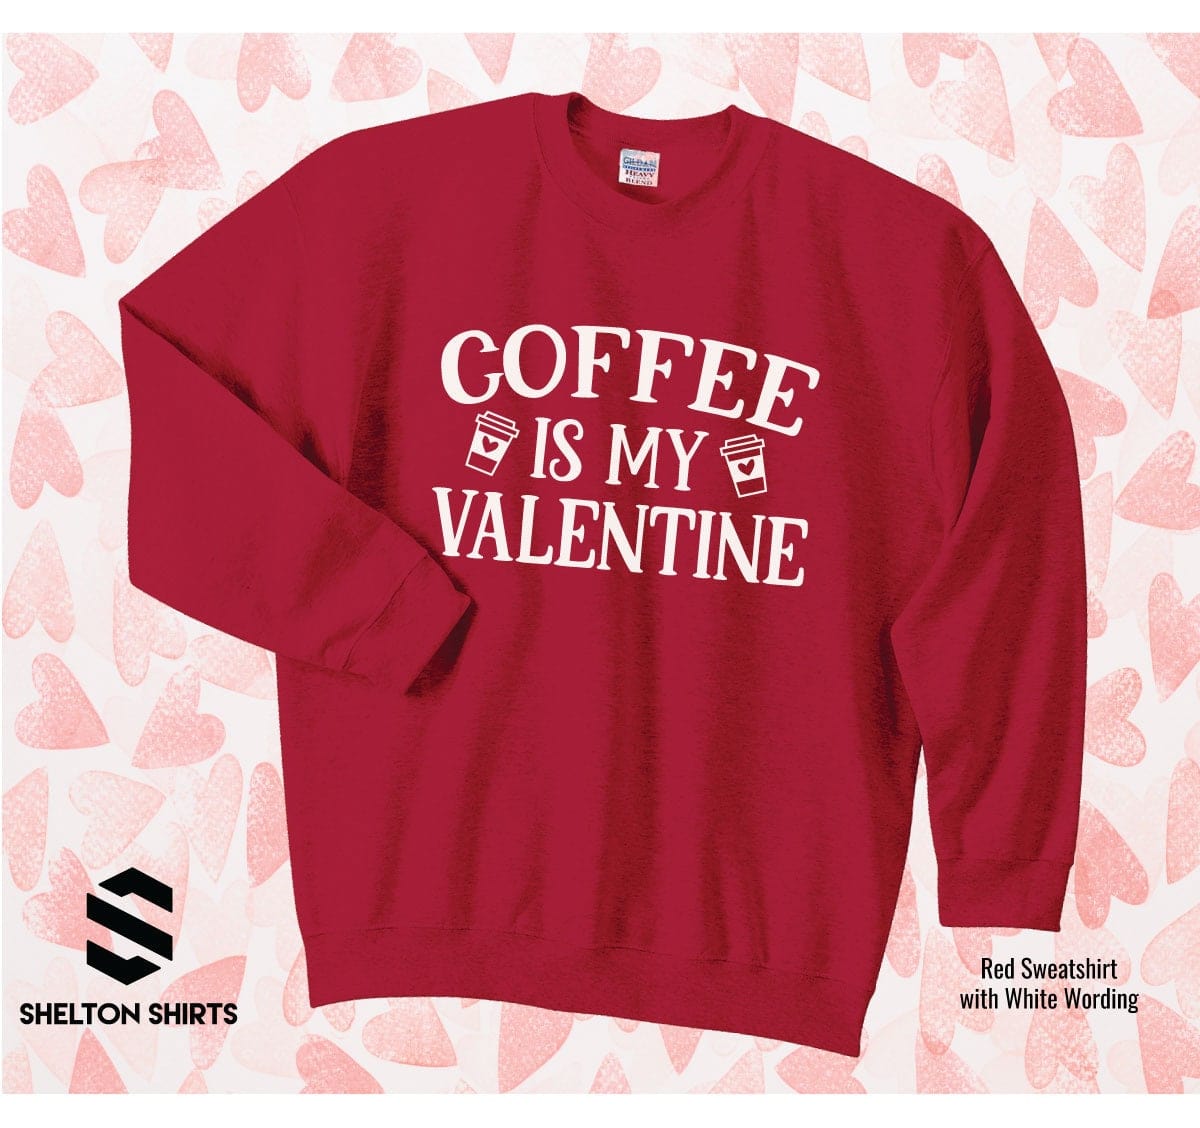 Coffee Is My Valentine Super Comfy Crew Neck Heather Grey Unisex Sweatshirt Candy Wrappers Candy Wrapper Store